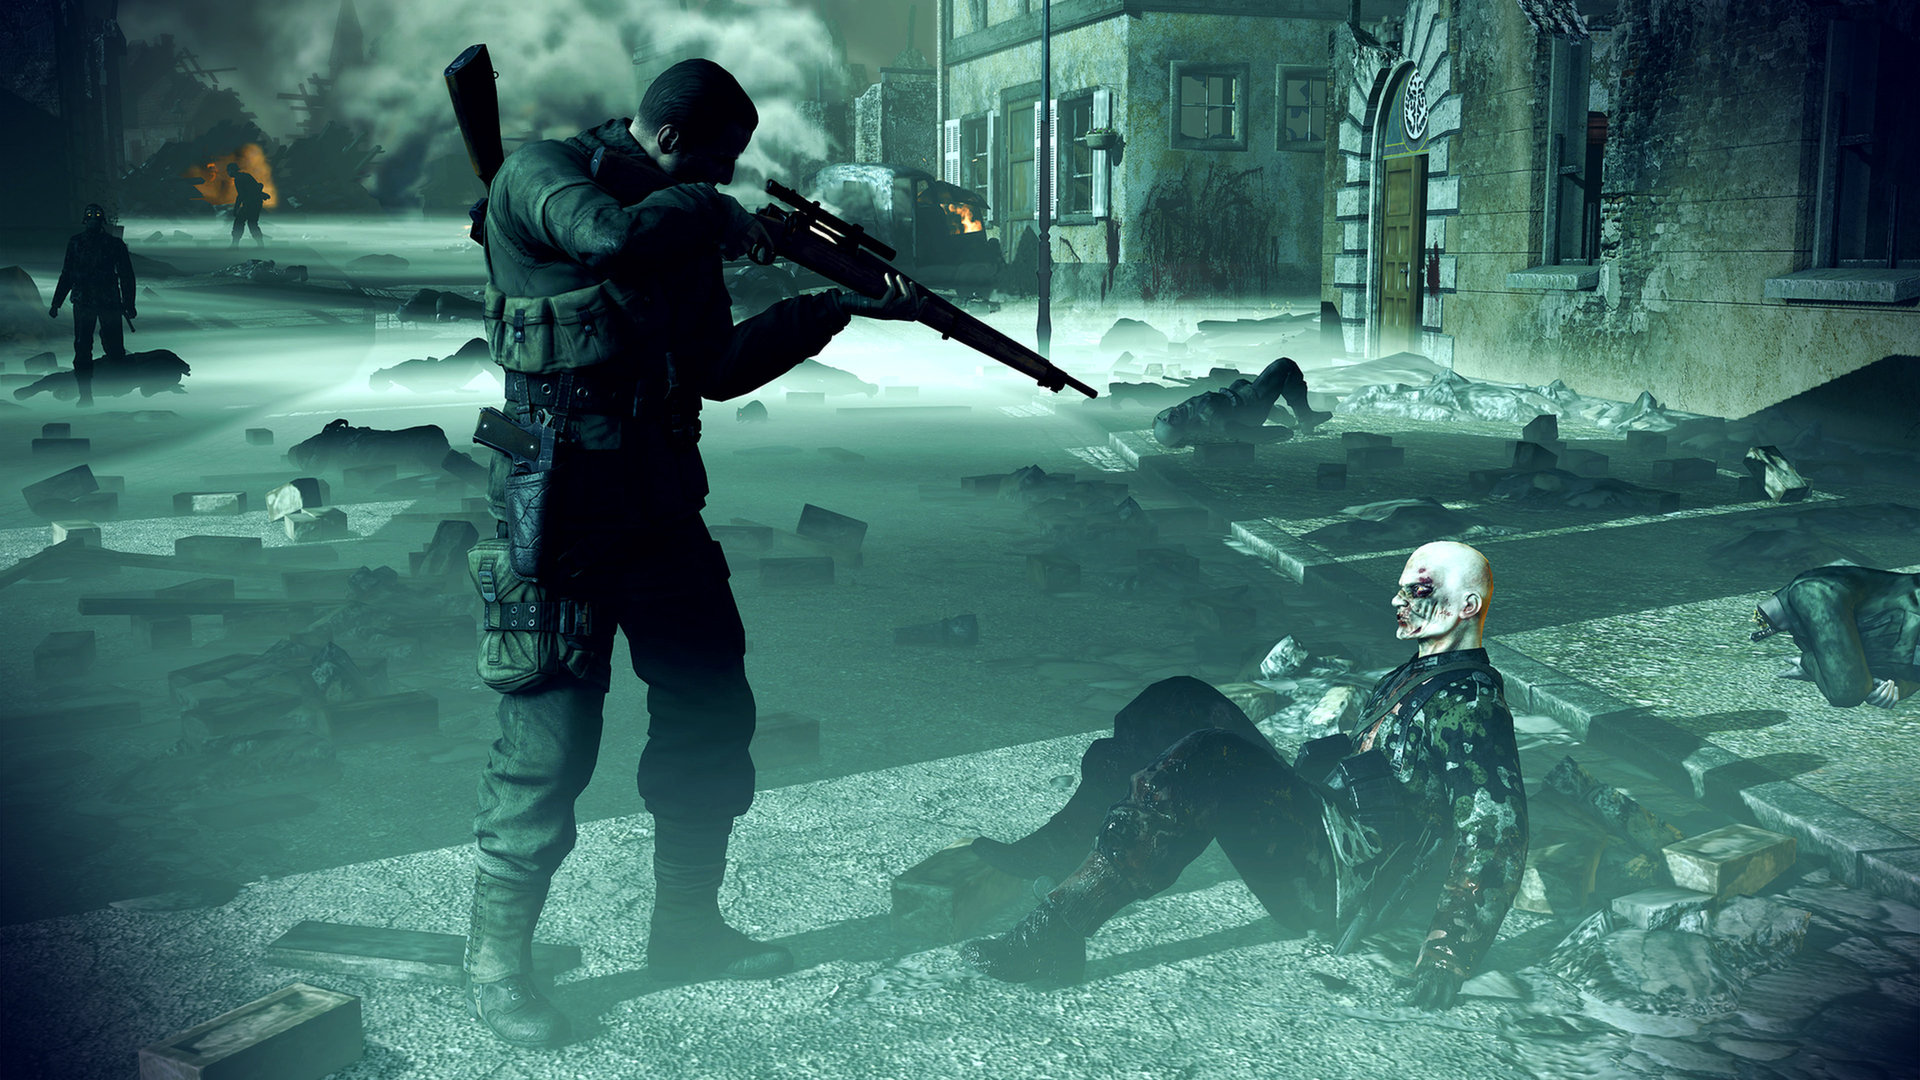 Best Sniper Elite Nazi Zombie Army Wallpaper Id For High